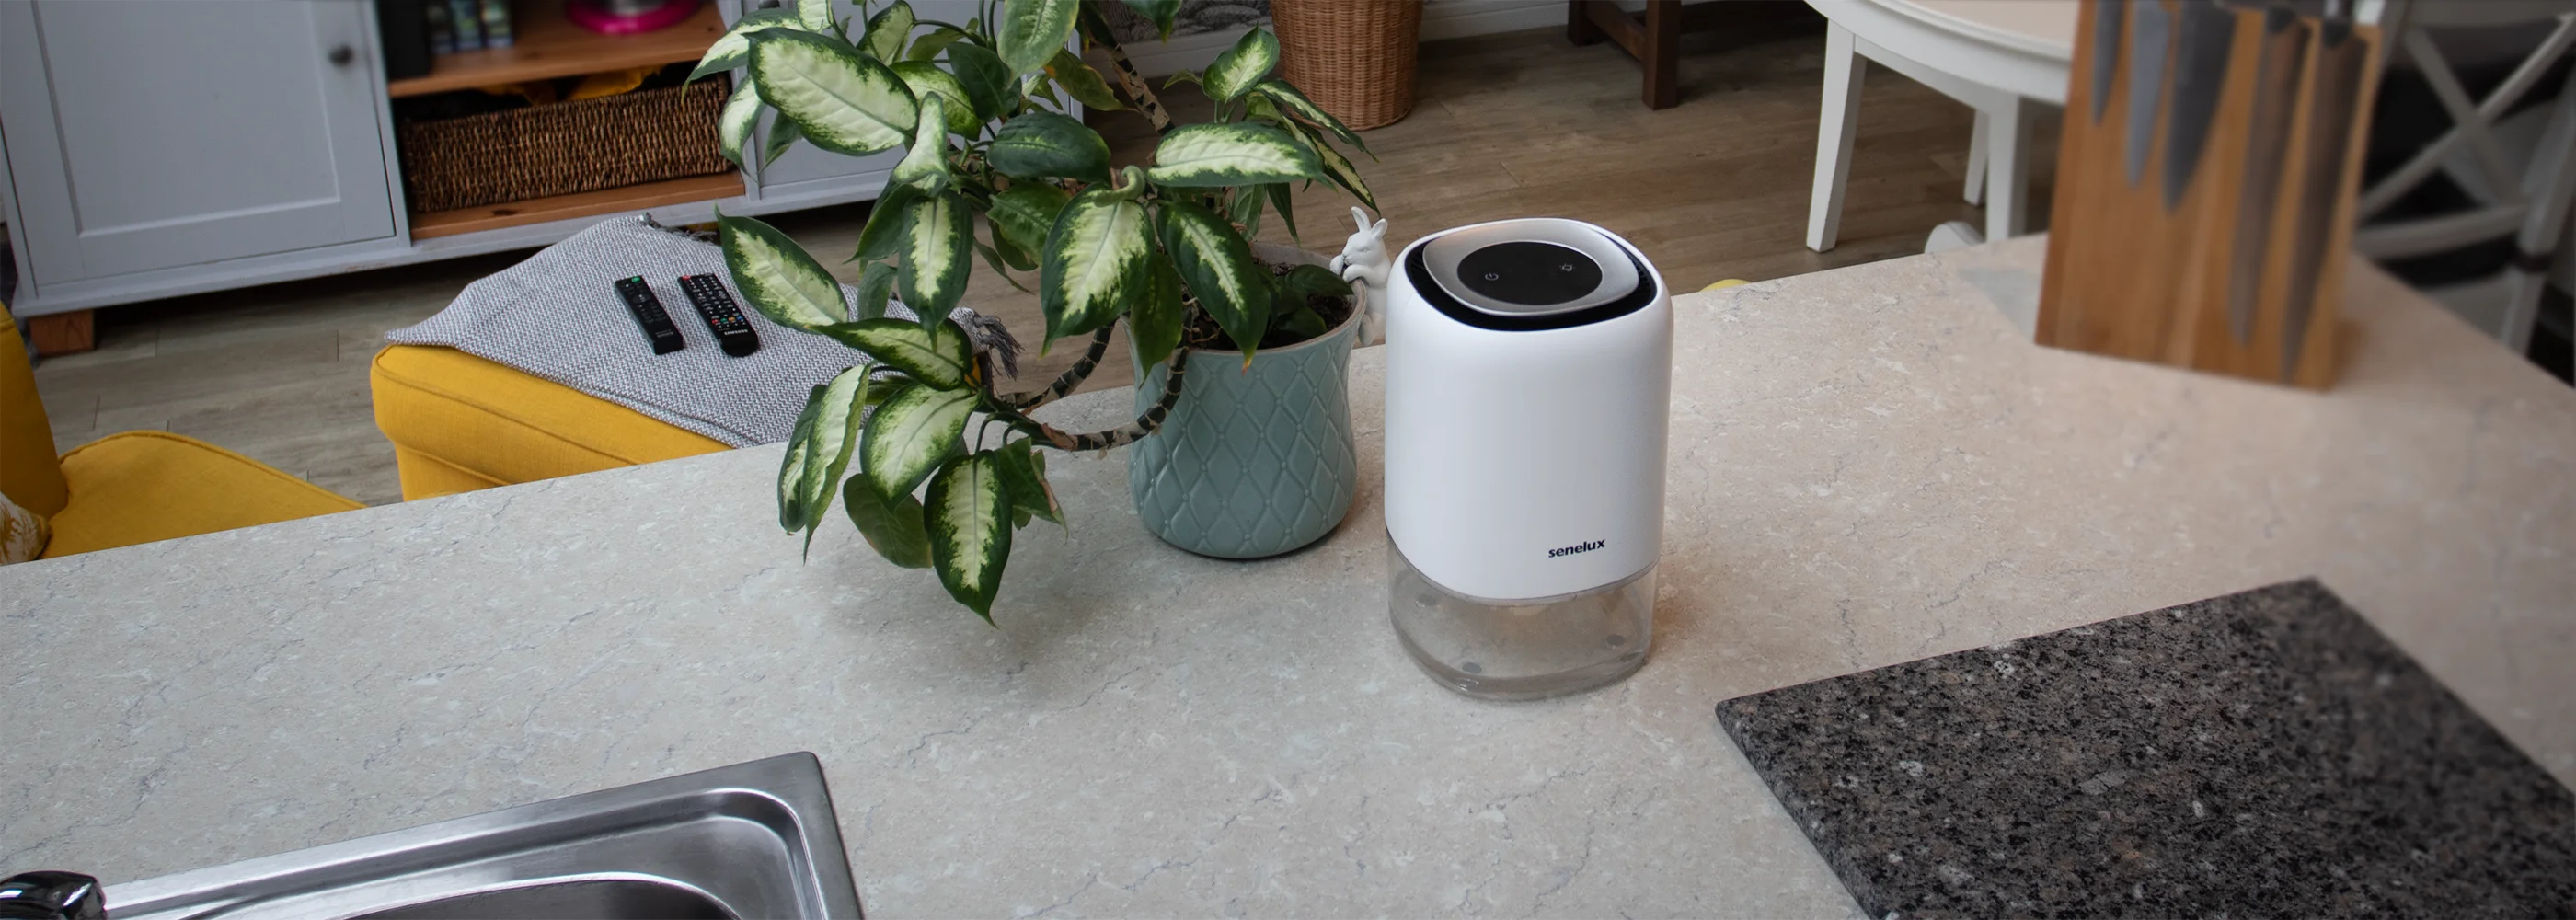 A photo of the Senelux Q4 Dehumidifier in a kitchen setting with a marble chopping board and plant